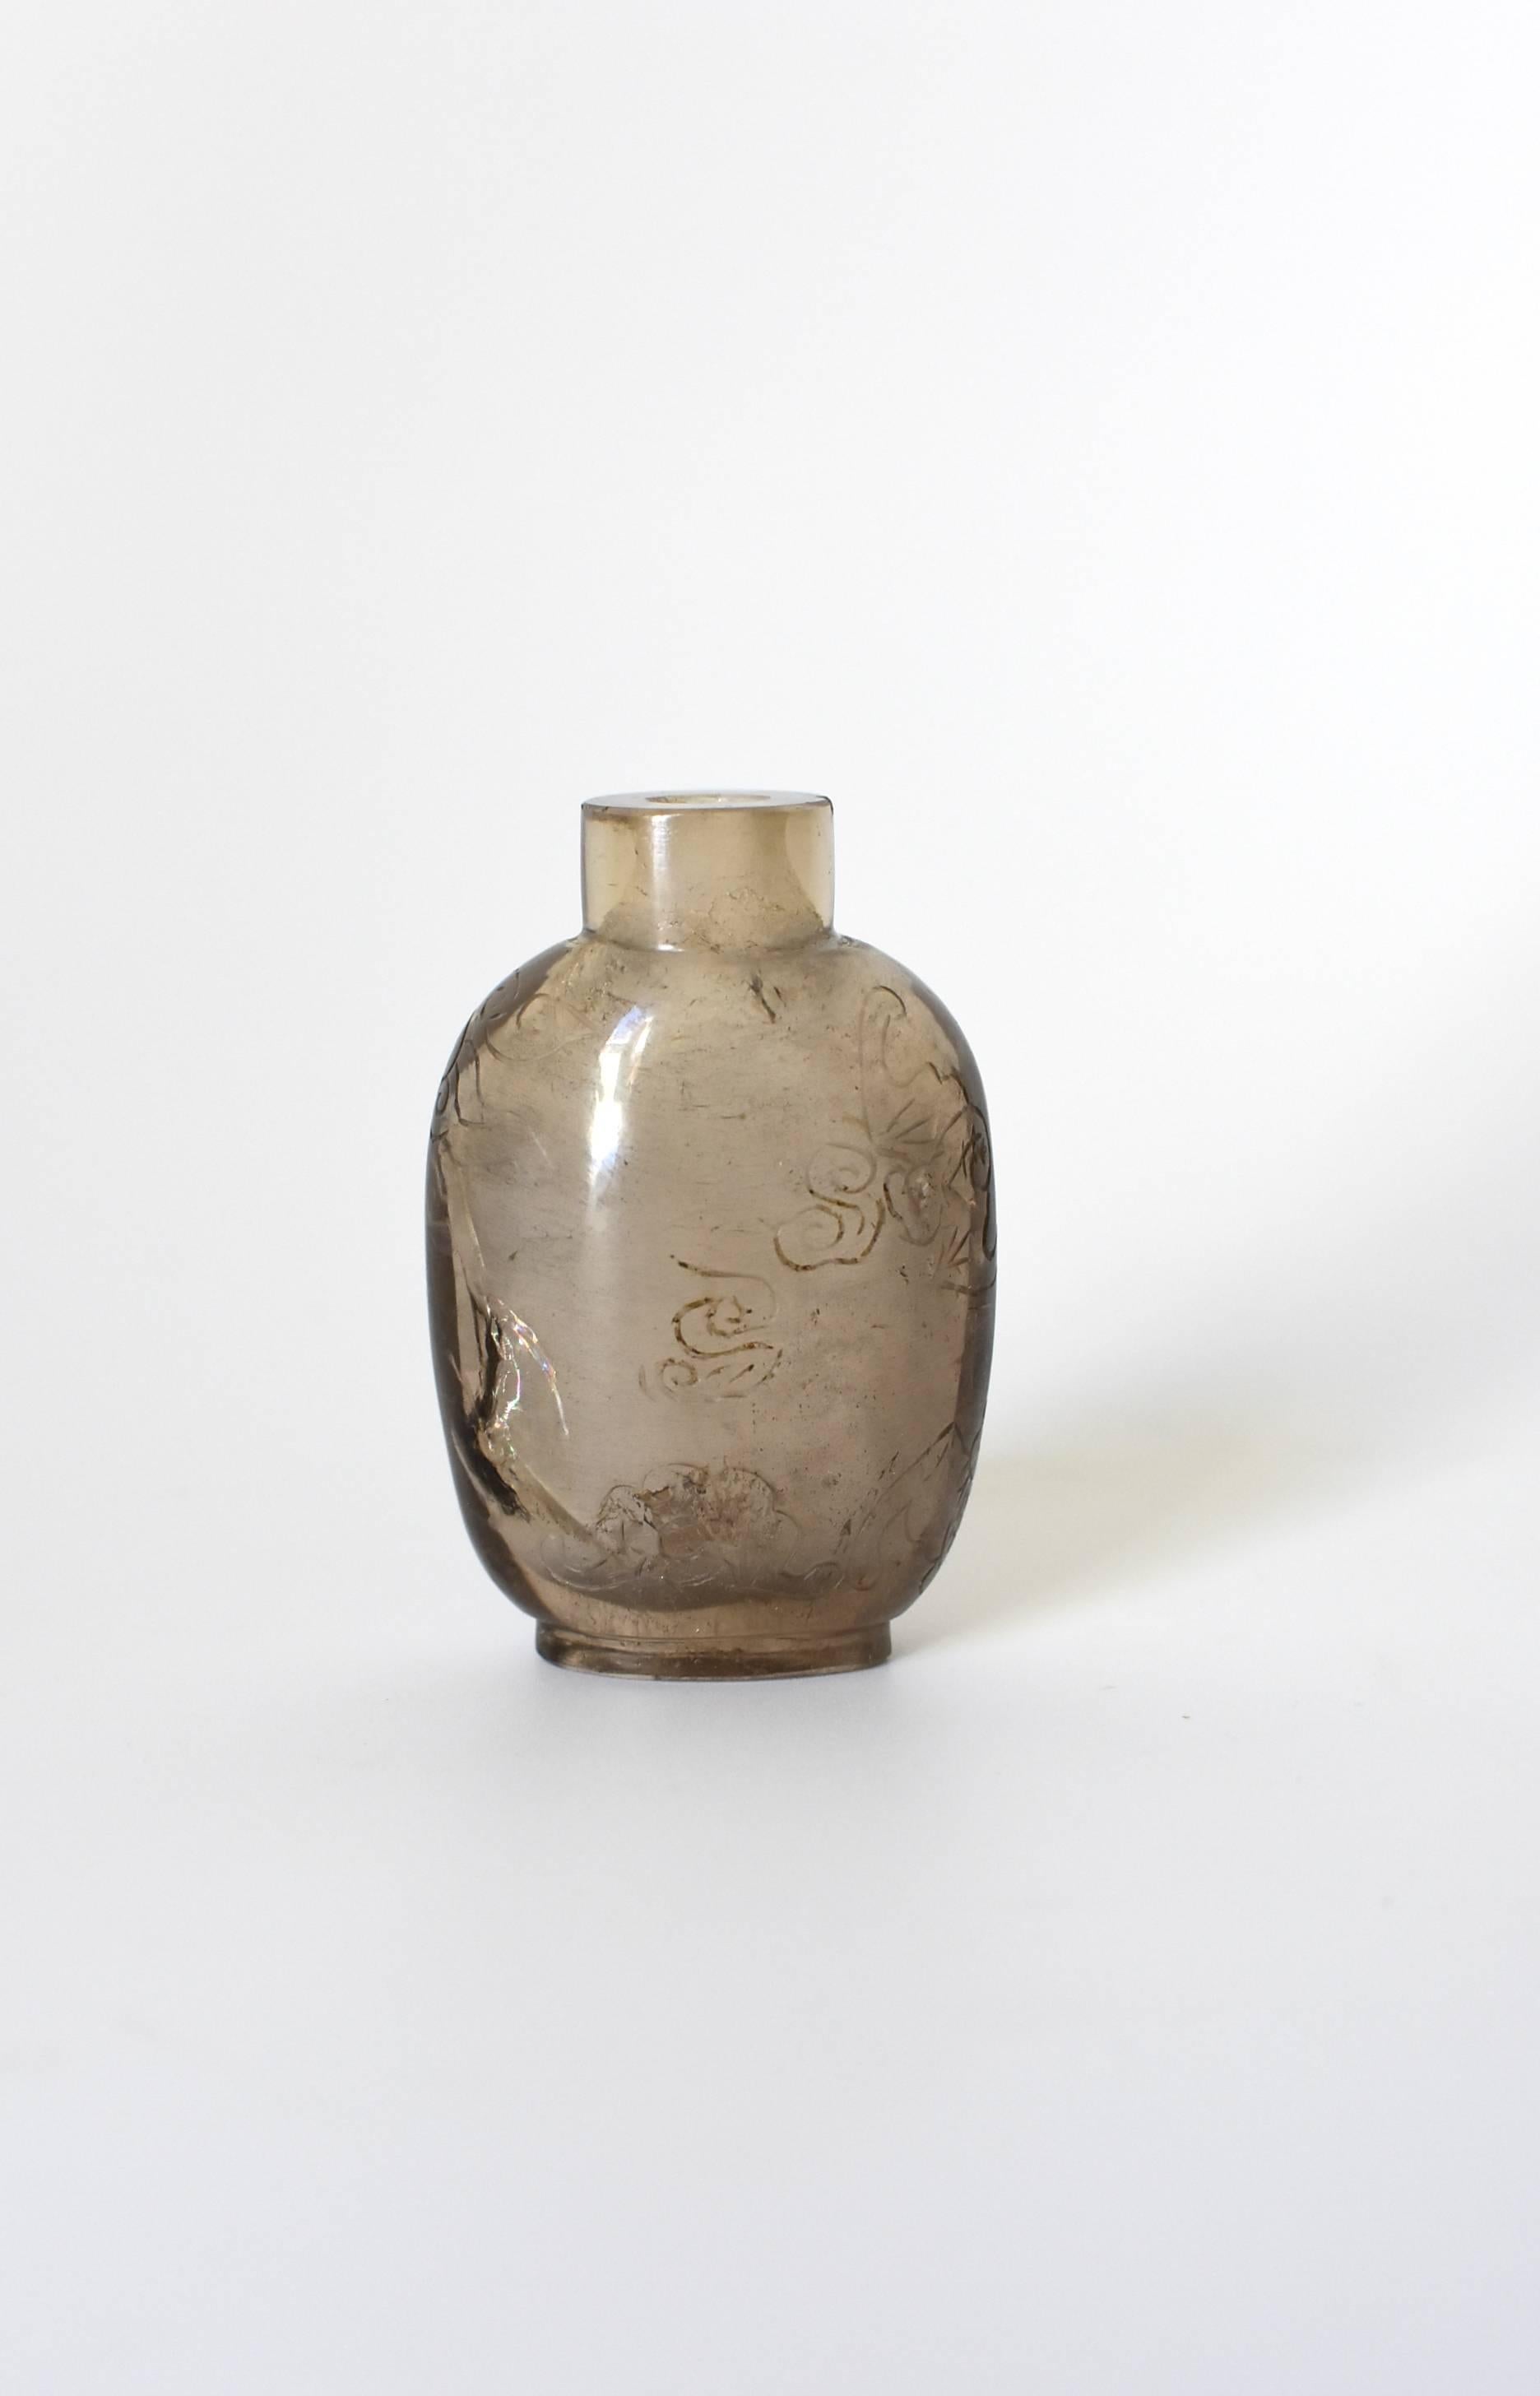 This is a 19th century, smoky quartz rock crystal Chinese snuff bottle. It is carved from a piece of natural crystal, hollowed out and polished to perfection. Cloud pattern on the exterior is simple and beautiful. There is a natural fissure in the